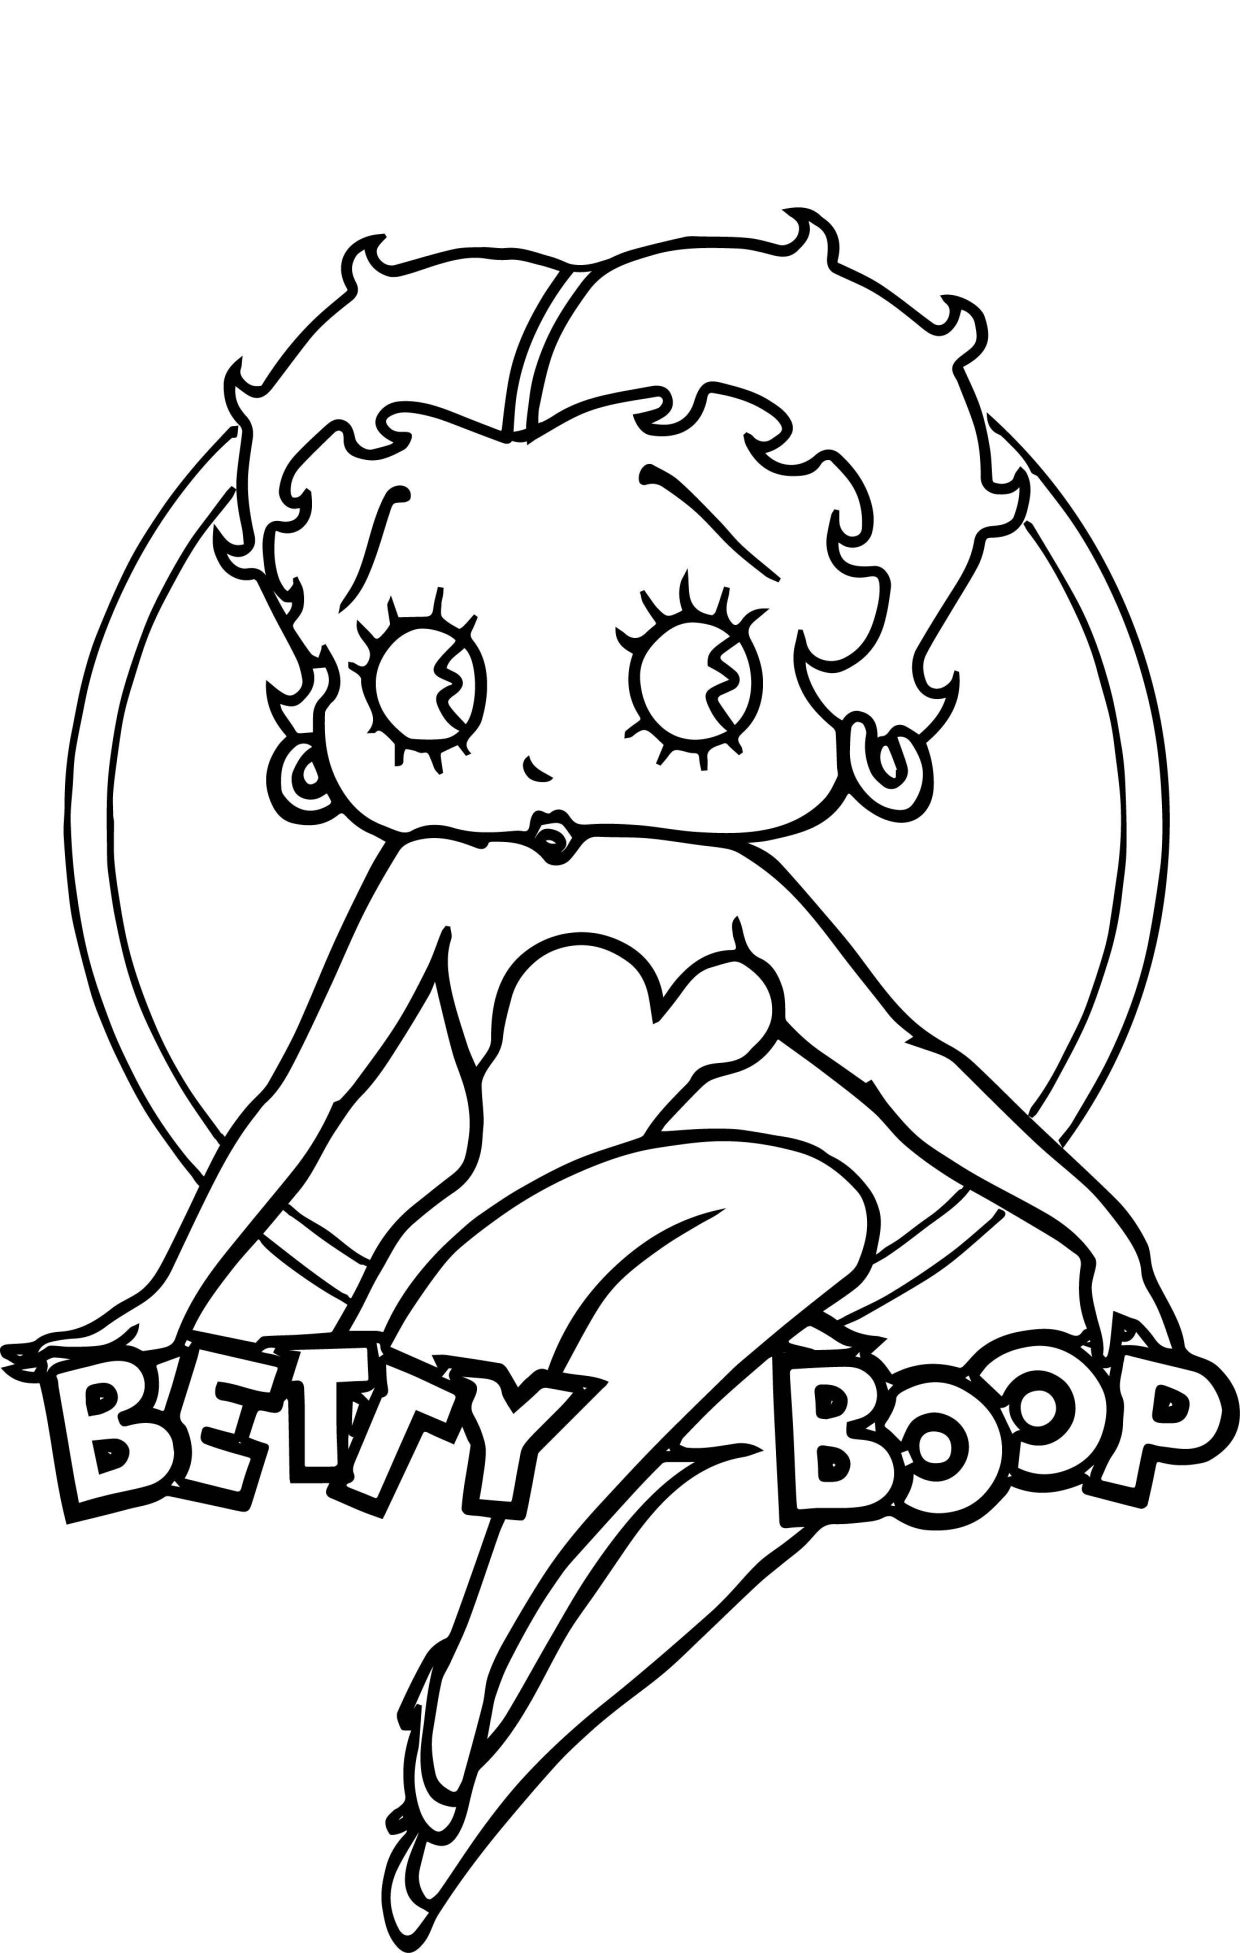 Betty Boop Coloring Pages 1